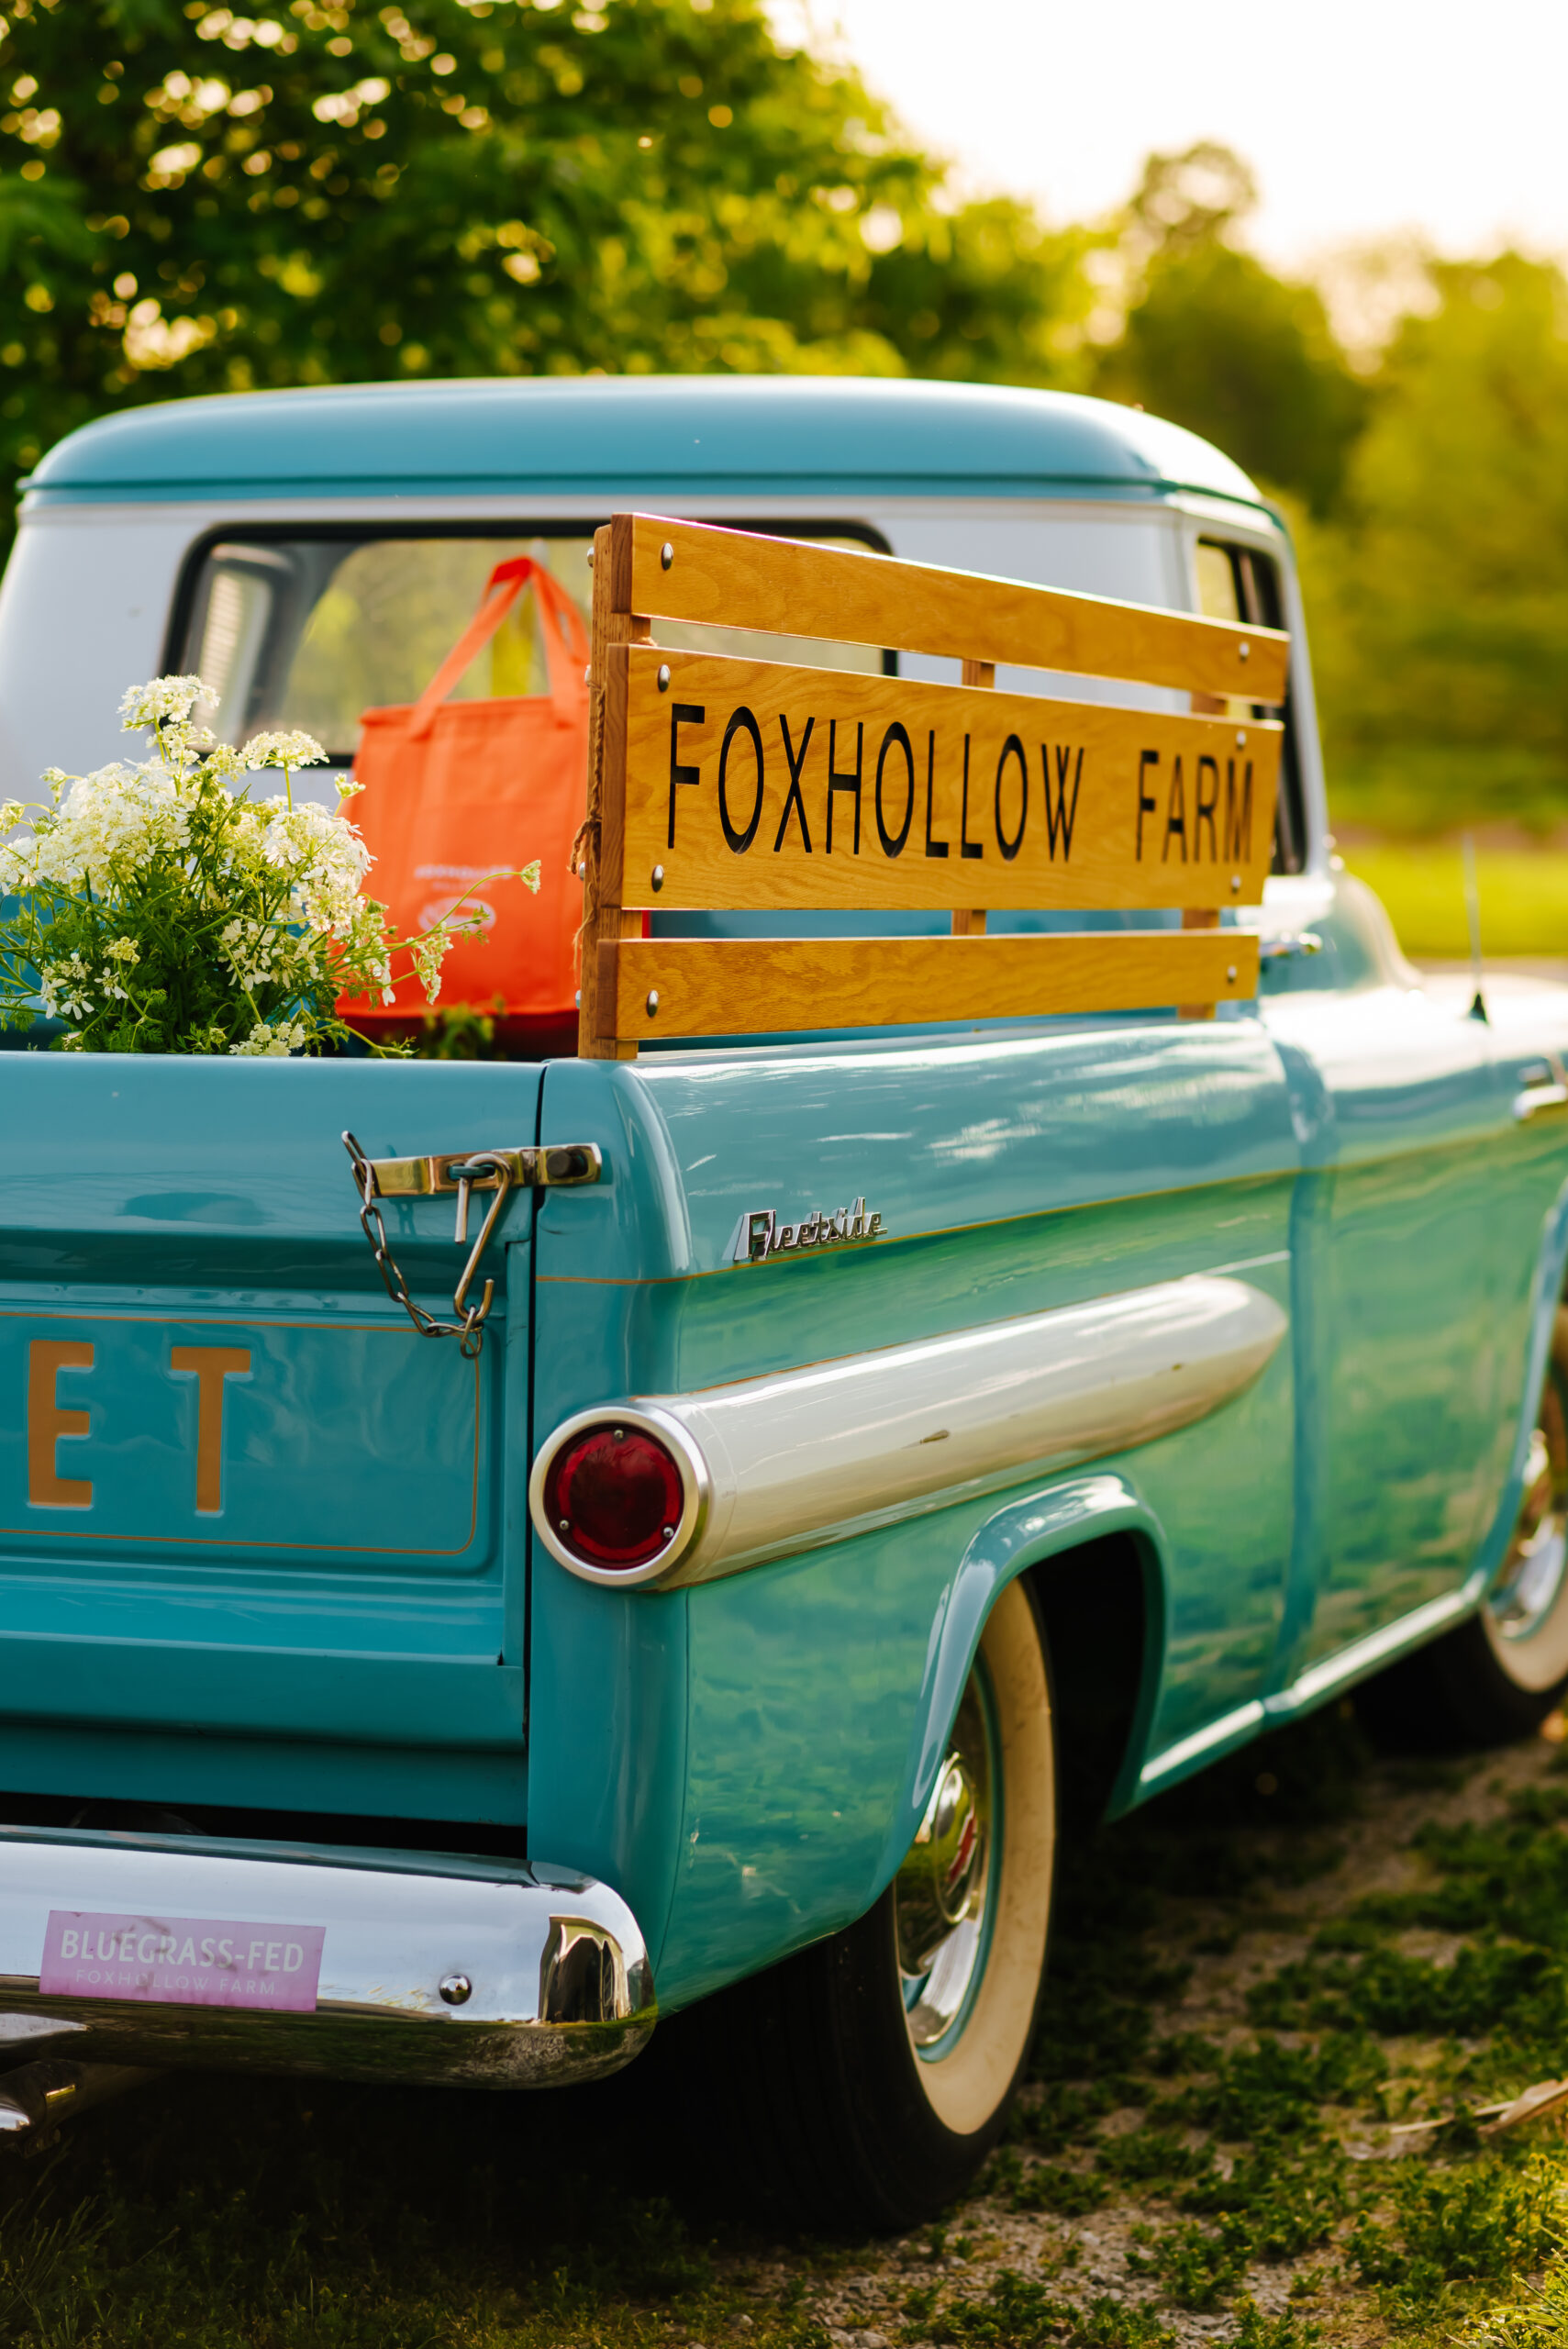 A vintage blue Chevy pickup truck carries spring flowers and an orange Foxhollow Farm bag